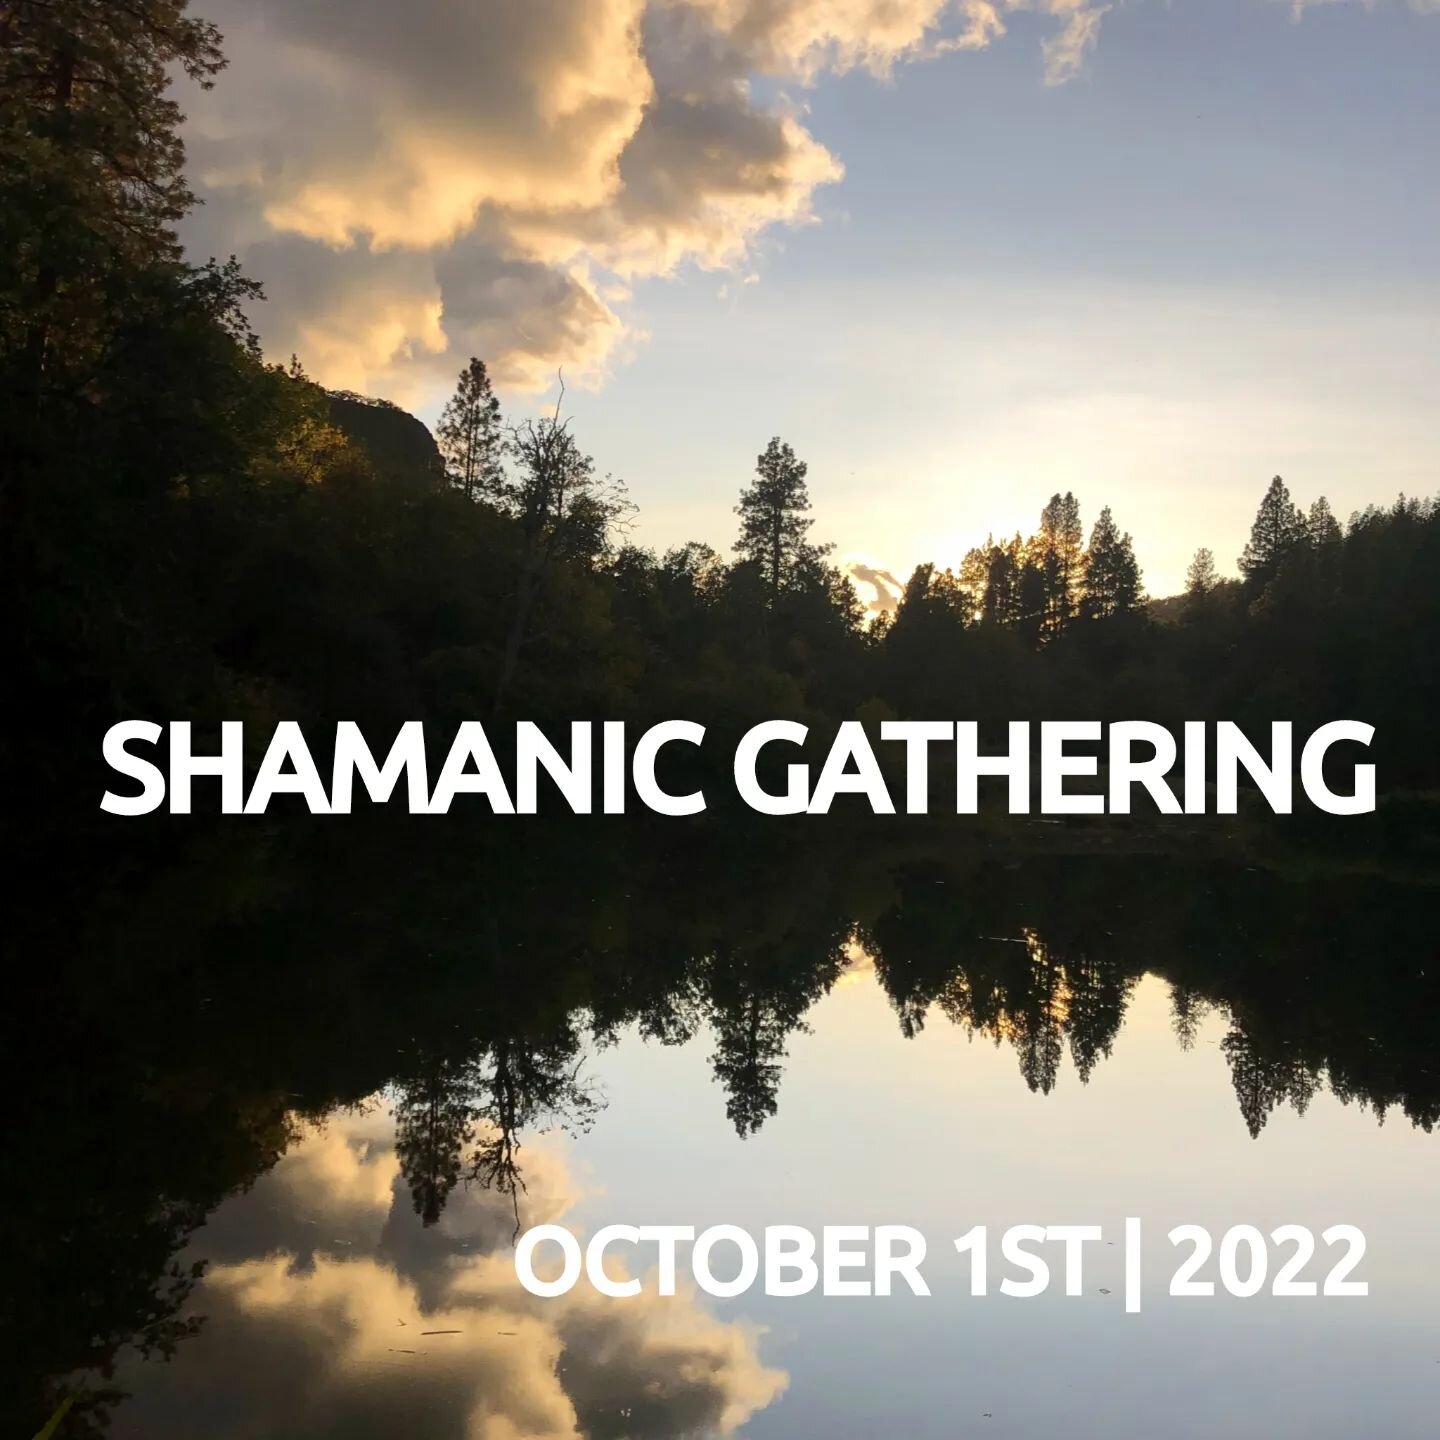 SPECIAL EVENT GATHERING 

OCTOBER 1ST, 2022 |  9AM

Join together as we create a heart-opening space for love, gratitude and healing.

💜

Location | In Person Bob White's 

It has been a moment since we have been all together sharing this connection